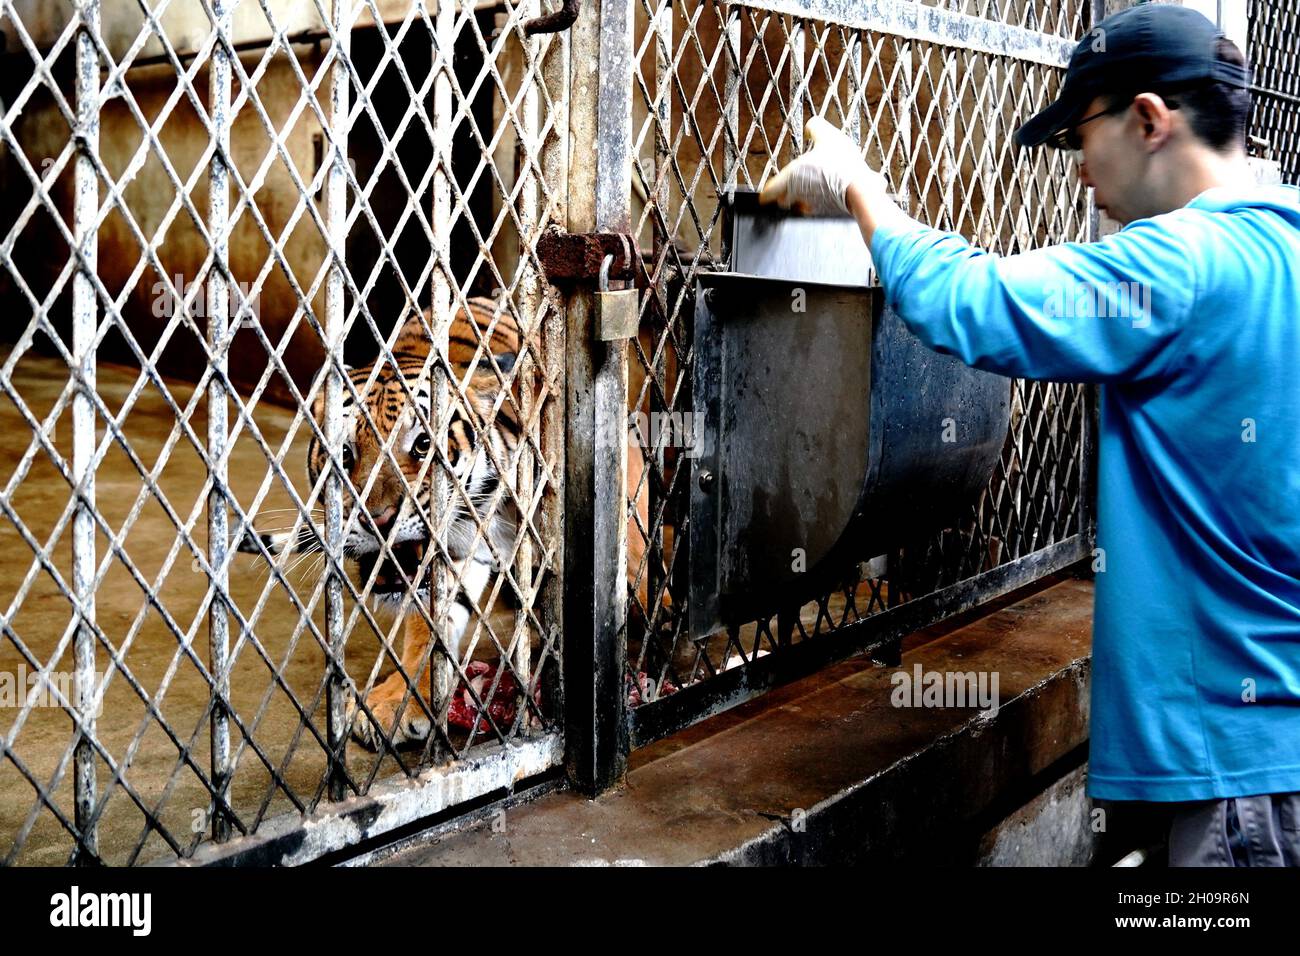 Shanghai. 11th Oct, 2021. A breeder feeds a South China tiger at the Shanghai Zoo in east China's Shanghai, Oct. 11, 2021. The South China tiger is a rare kind endemic to China and is on the national first-class protection list. Currently, a total of 28 South China tigers are living in the Shanghai Zoo. The zoo has recorded each tiger's information and established a gene bank for research, and tigers are treated and bred in a scientific way. Credit: Zhang Jiansong/Xinhua/Alamy Live News Stock Photo